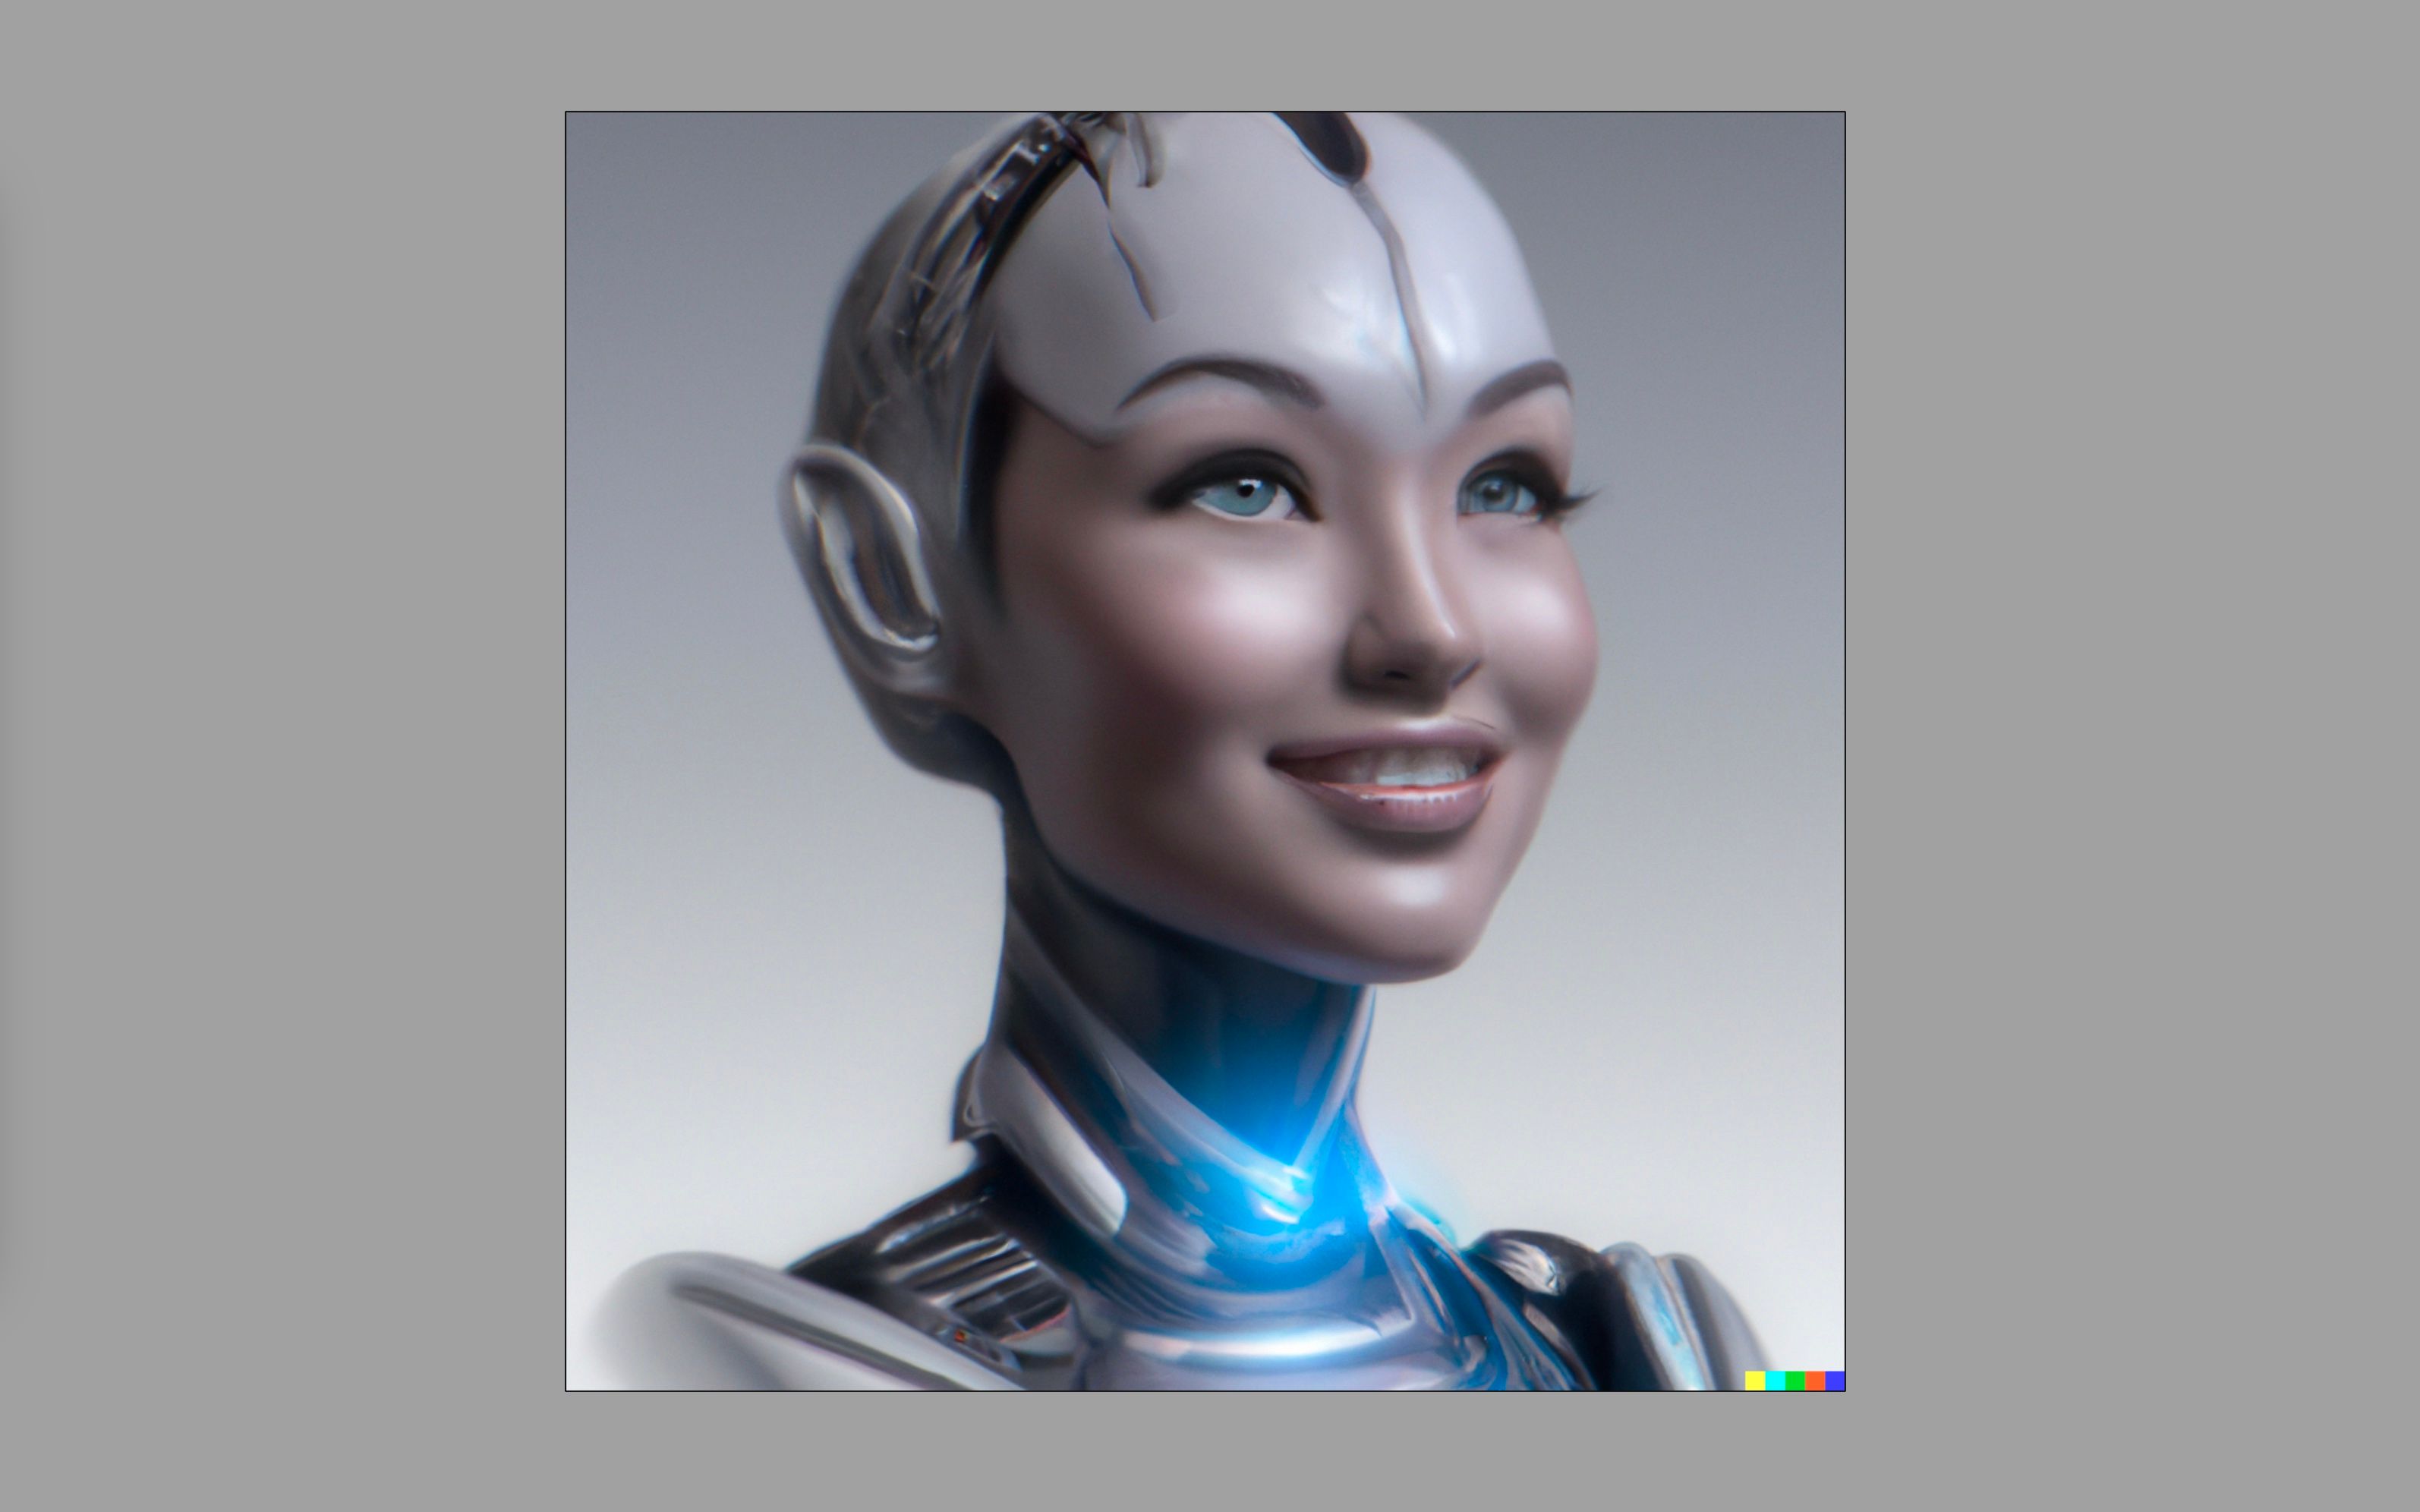 Portrait of a cyborg in the style of digital art, generated with Dall-E